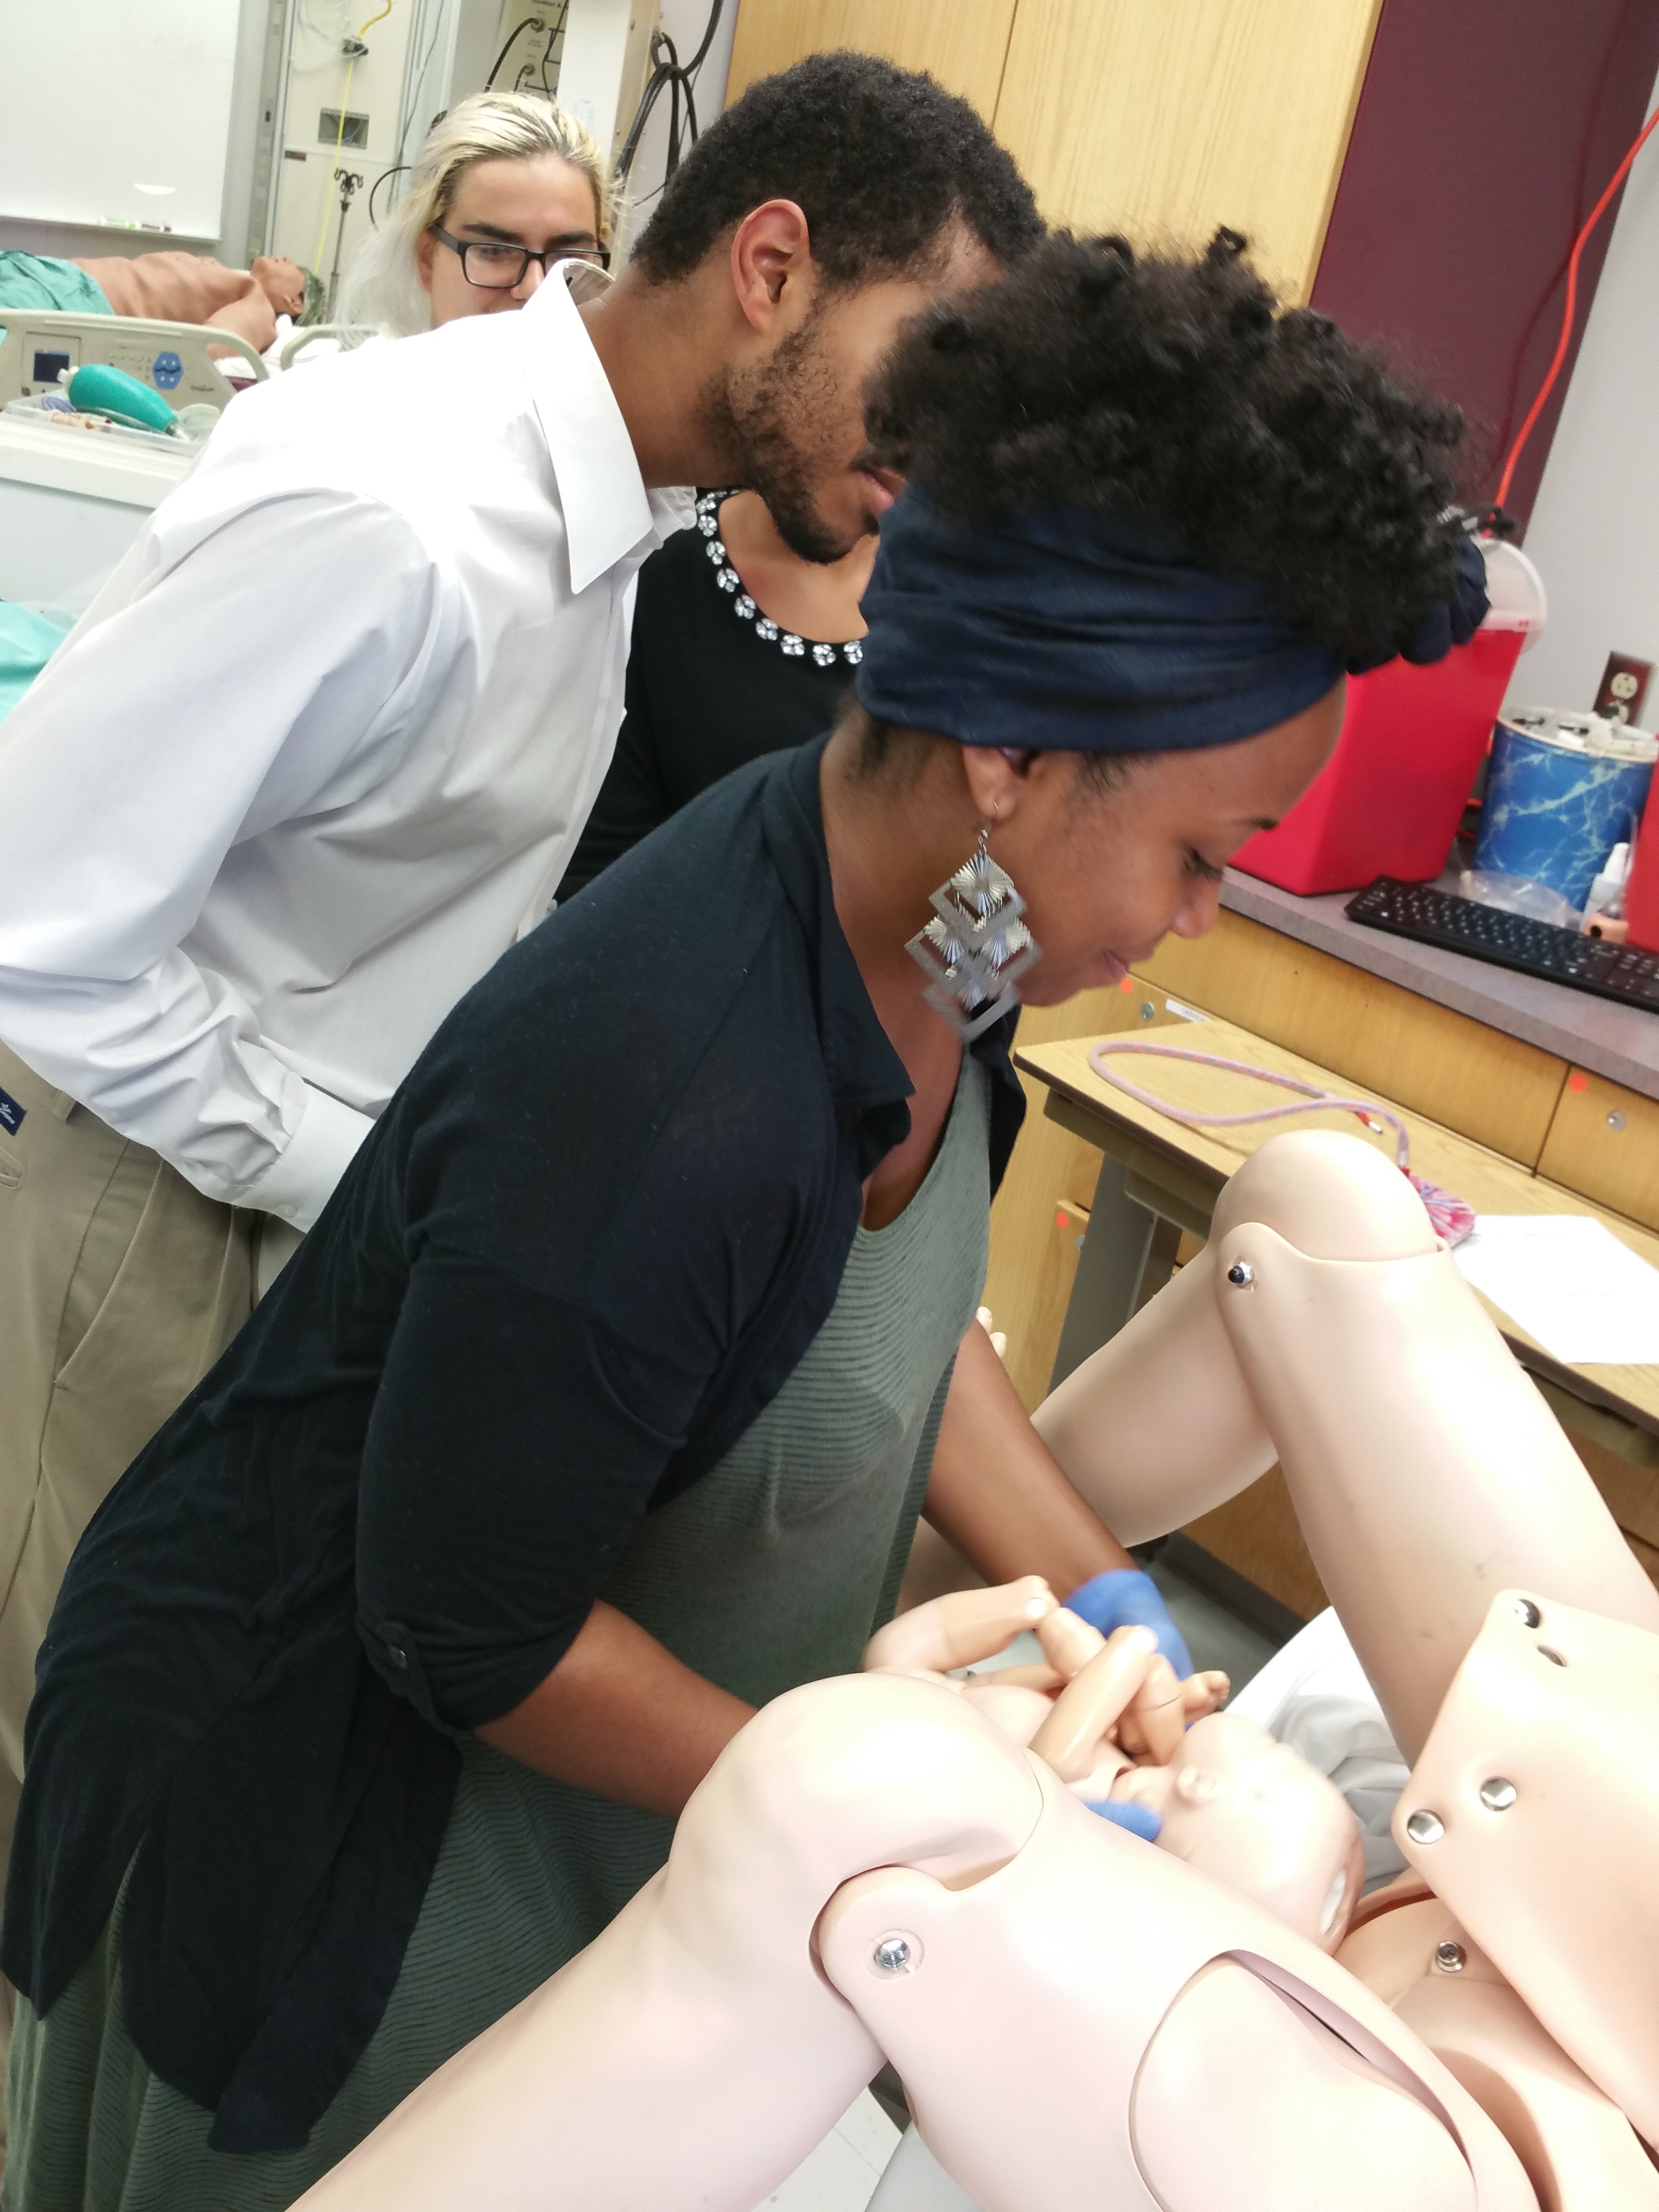 Prematric students delivering a simulation baby